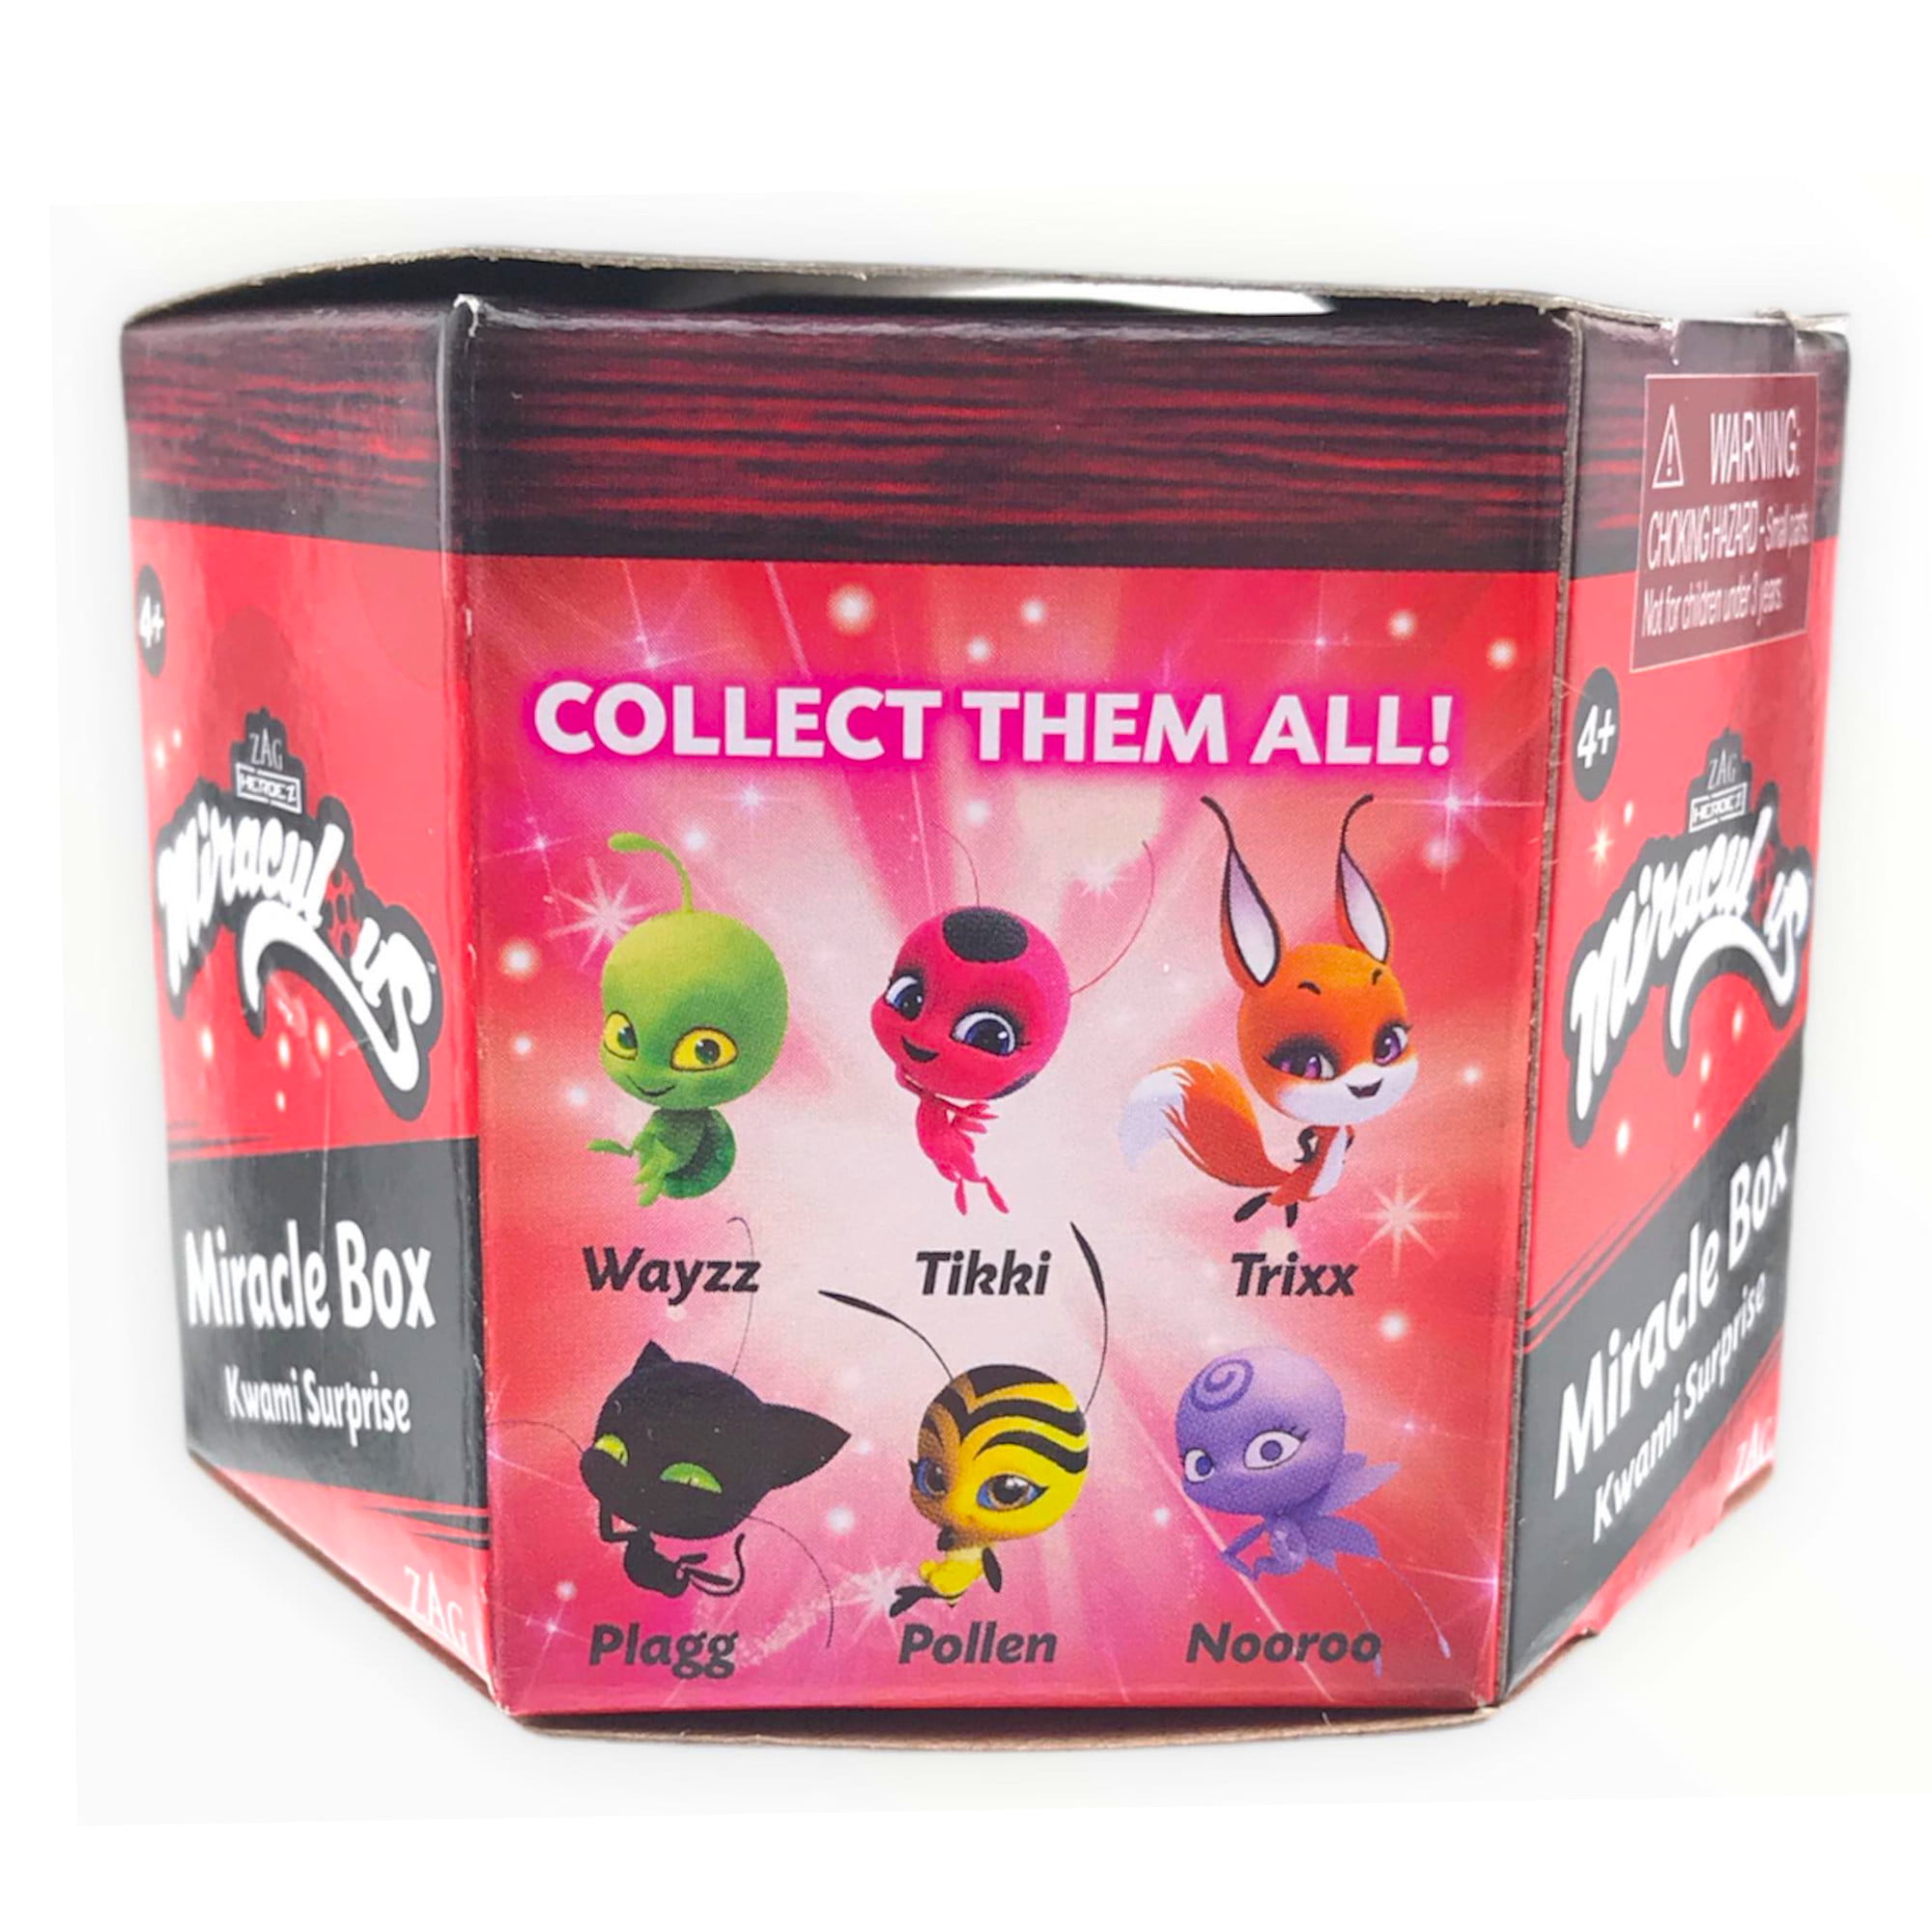 MIRACULOUS MIRACLE BOX KWAMI SURPRISE COLLECTIBLES BLIND BOX ...